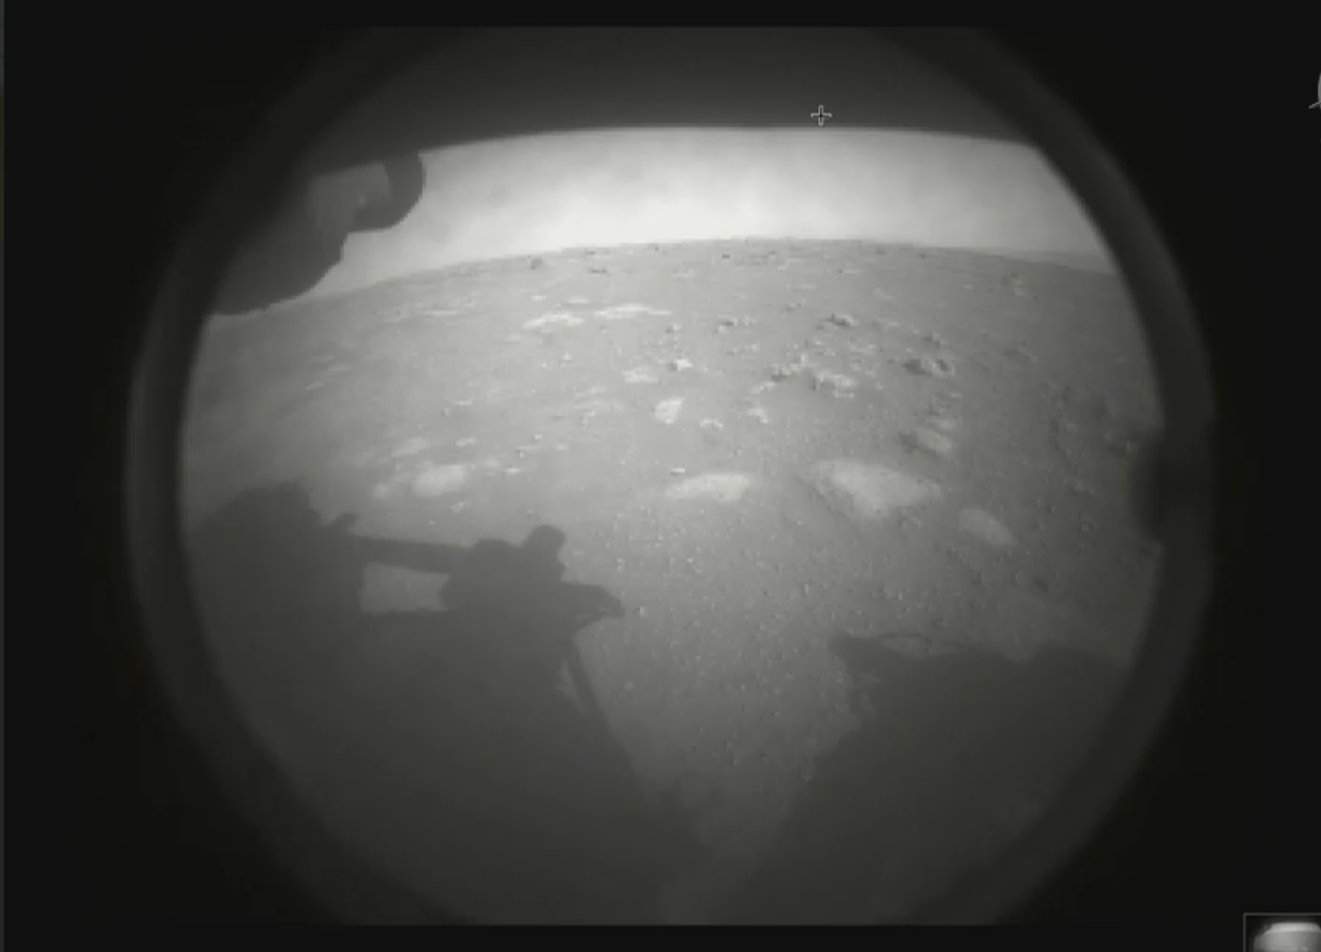 NASA rover lands on Mars to look for signs of ancient life